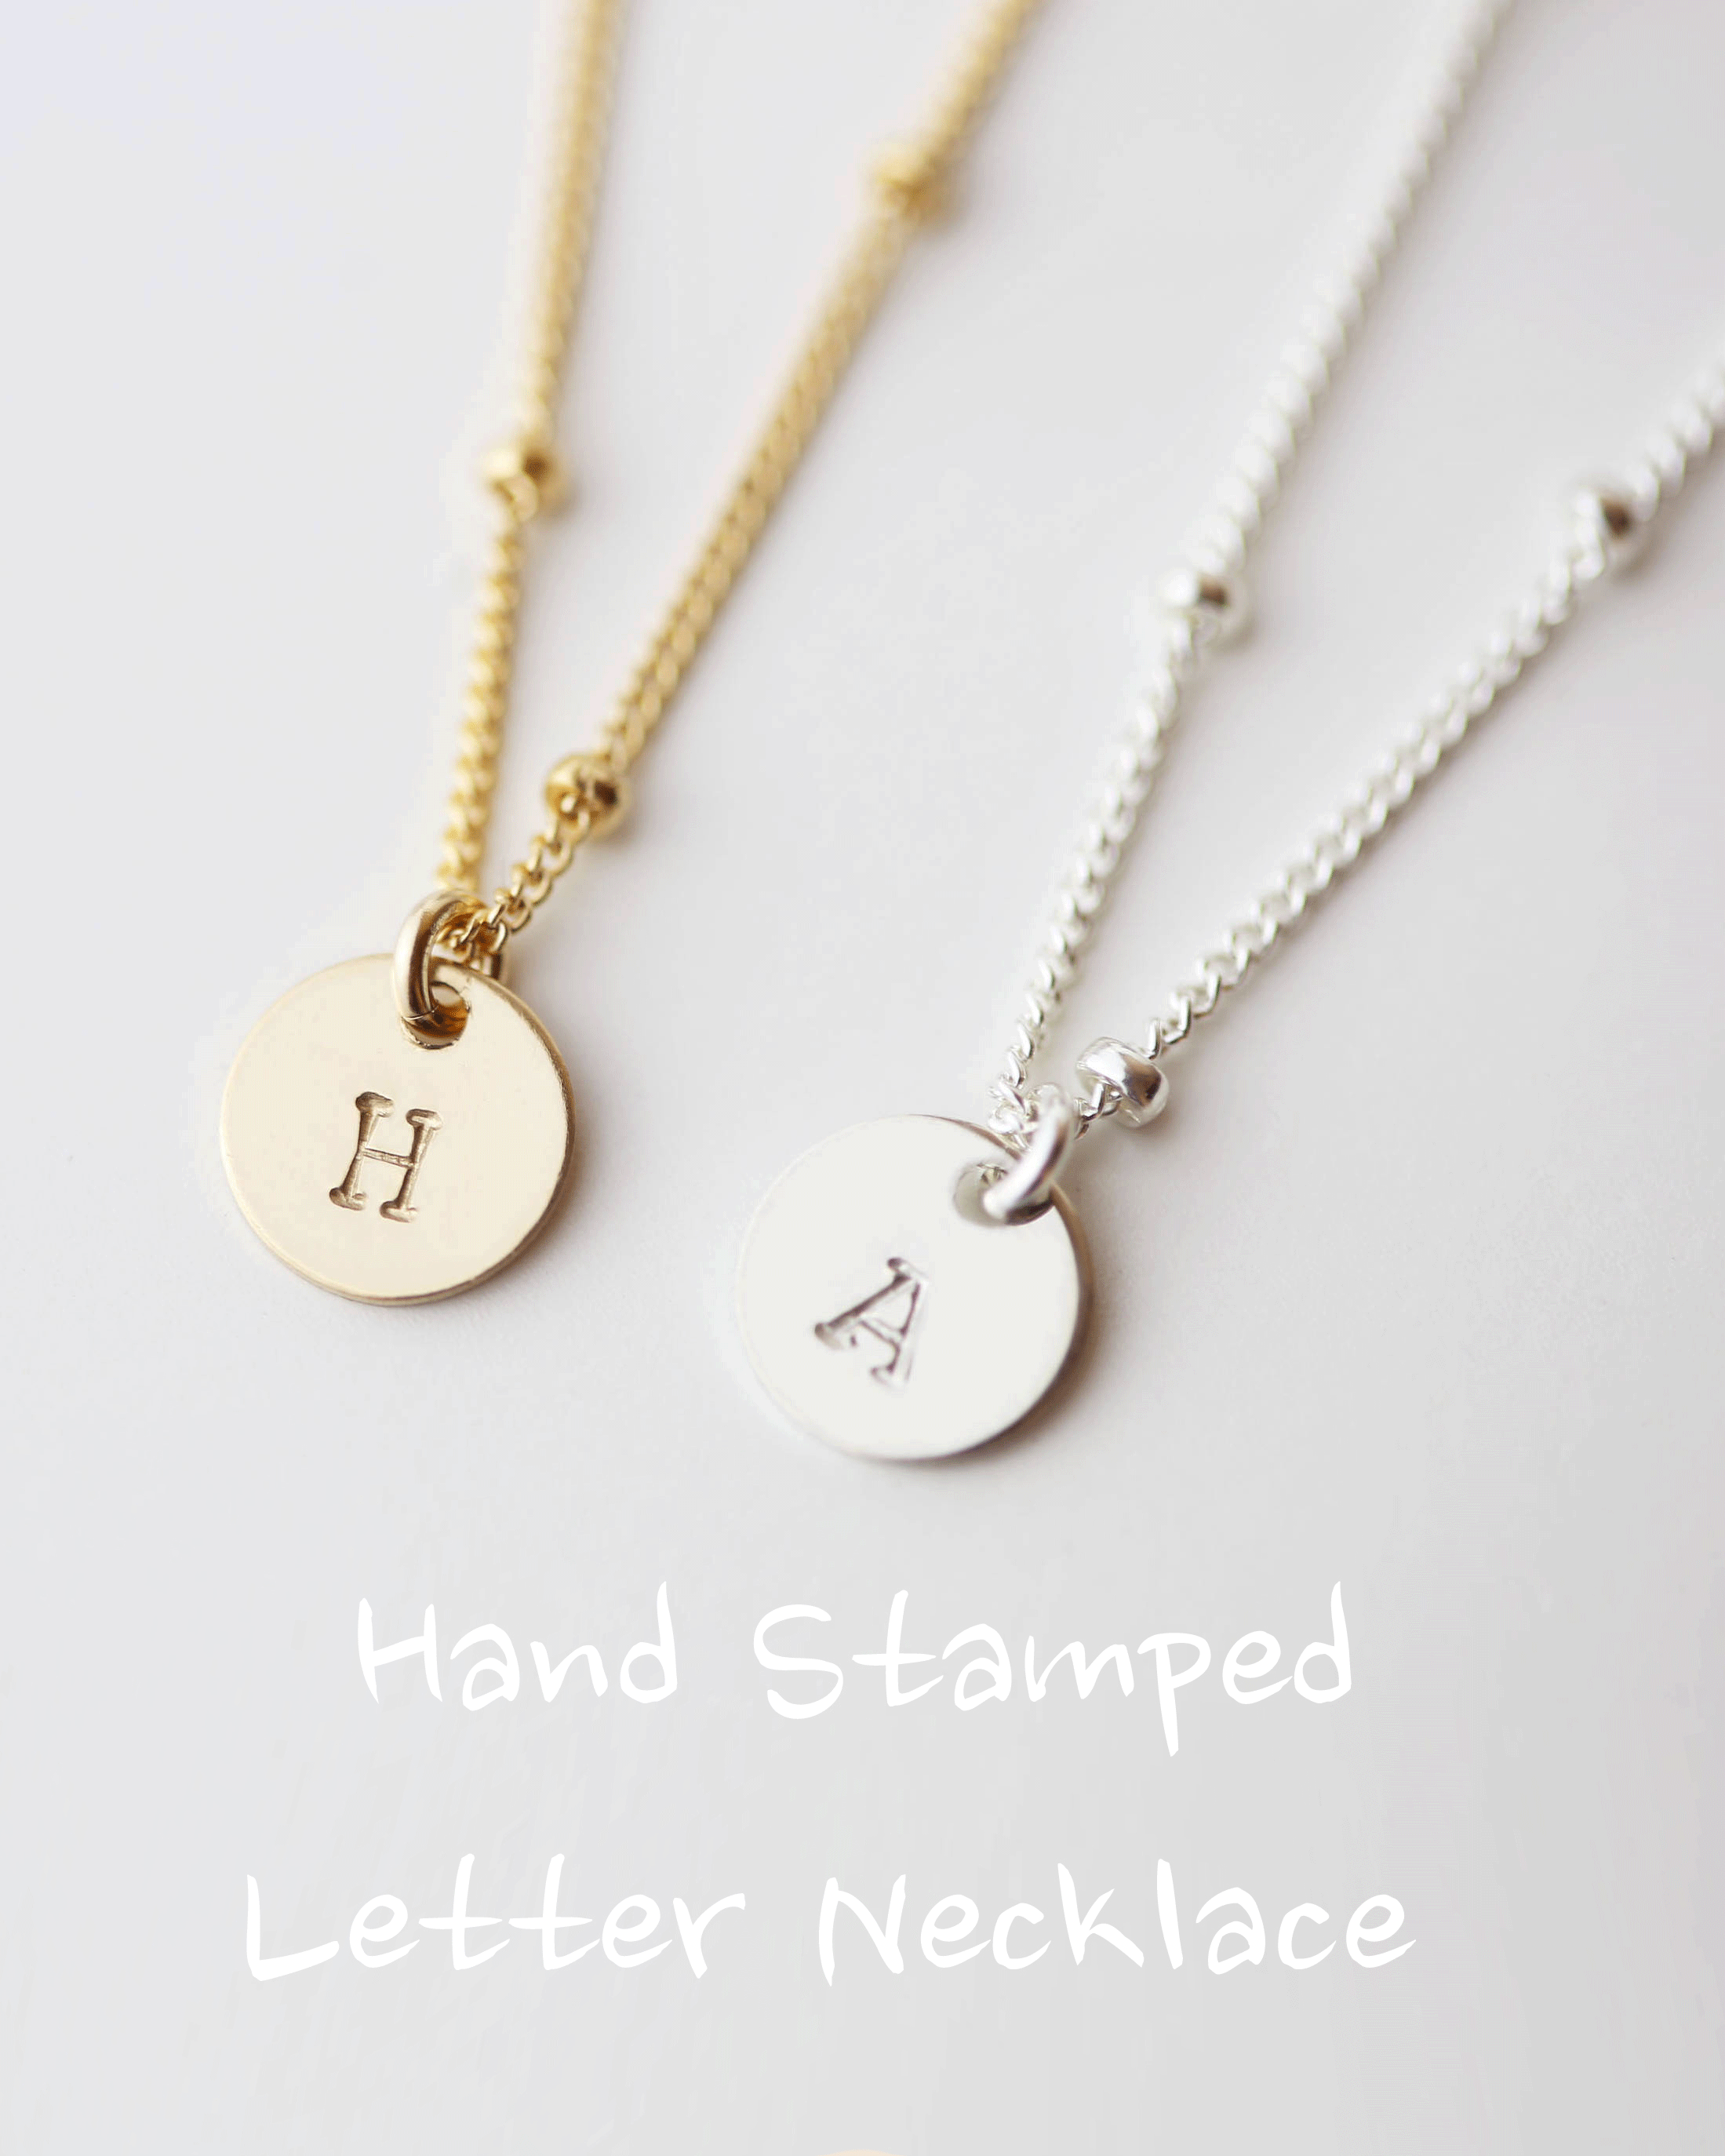 Buy Initial Necklace, Gold Initial Necklace, Letter Jewelry, Letter  Jewellery, Dainty Necklace, Gift for Her, Hand Stamped, Initial Jewellery,  Online in India - Etsy